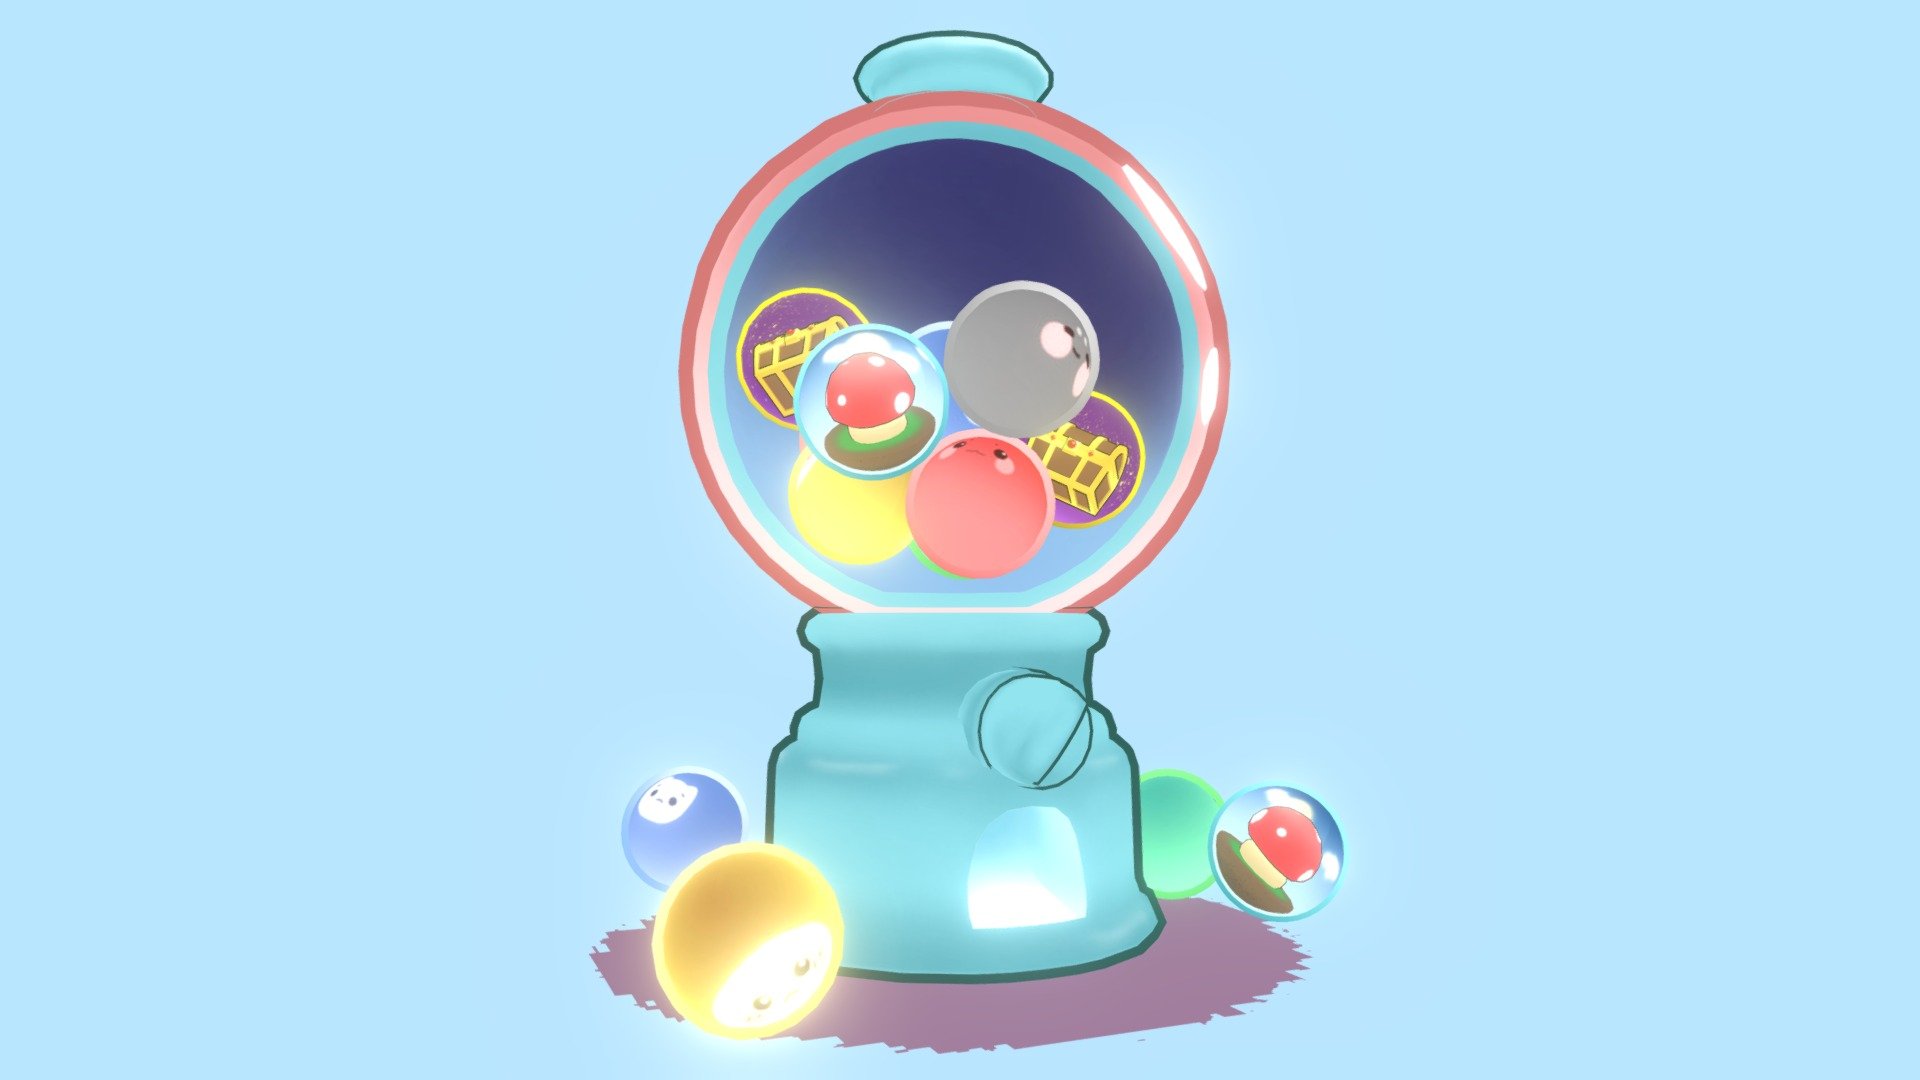 A cute gumball machine.

Modeling in Maya, texturing in substance painter and Photoshop 3d model